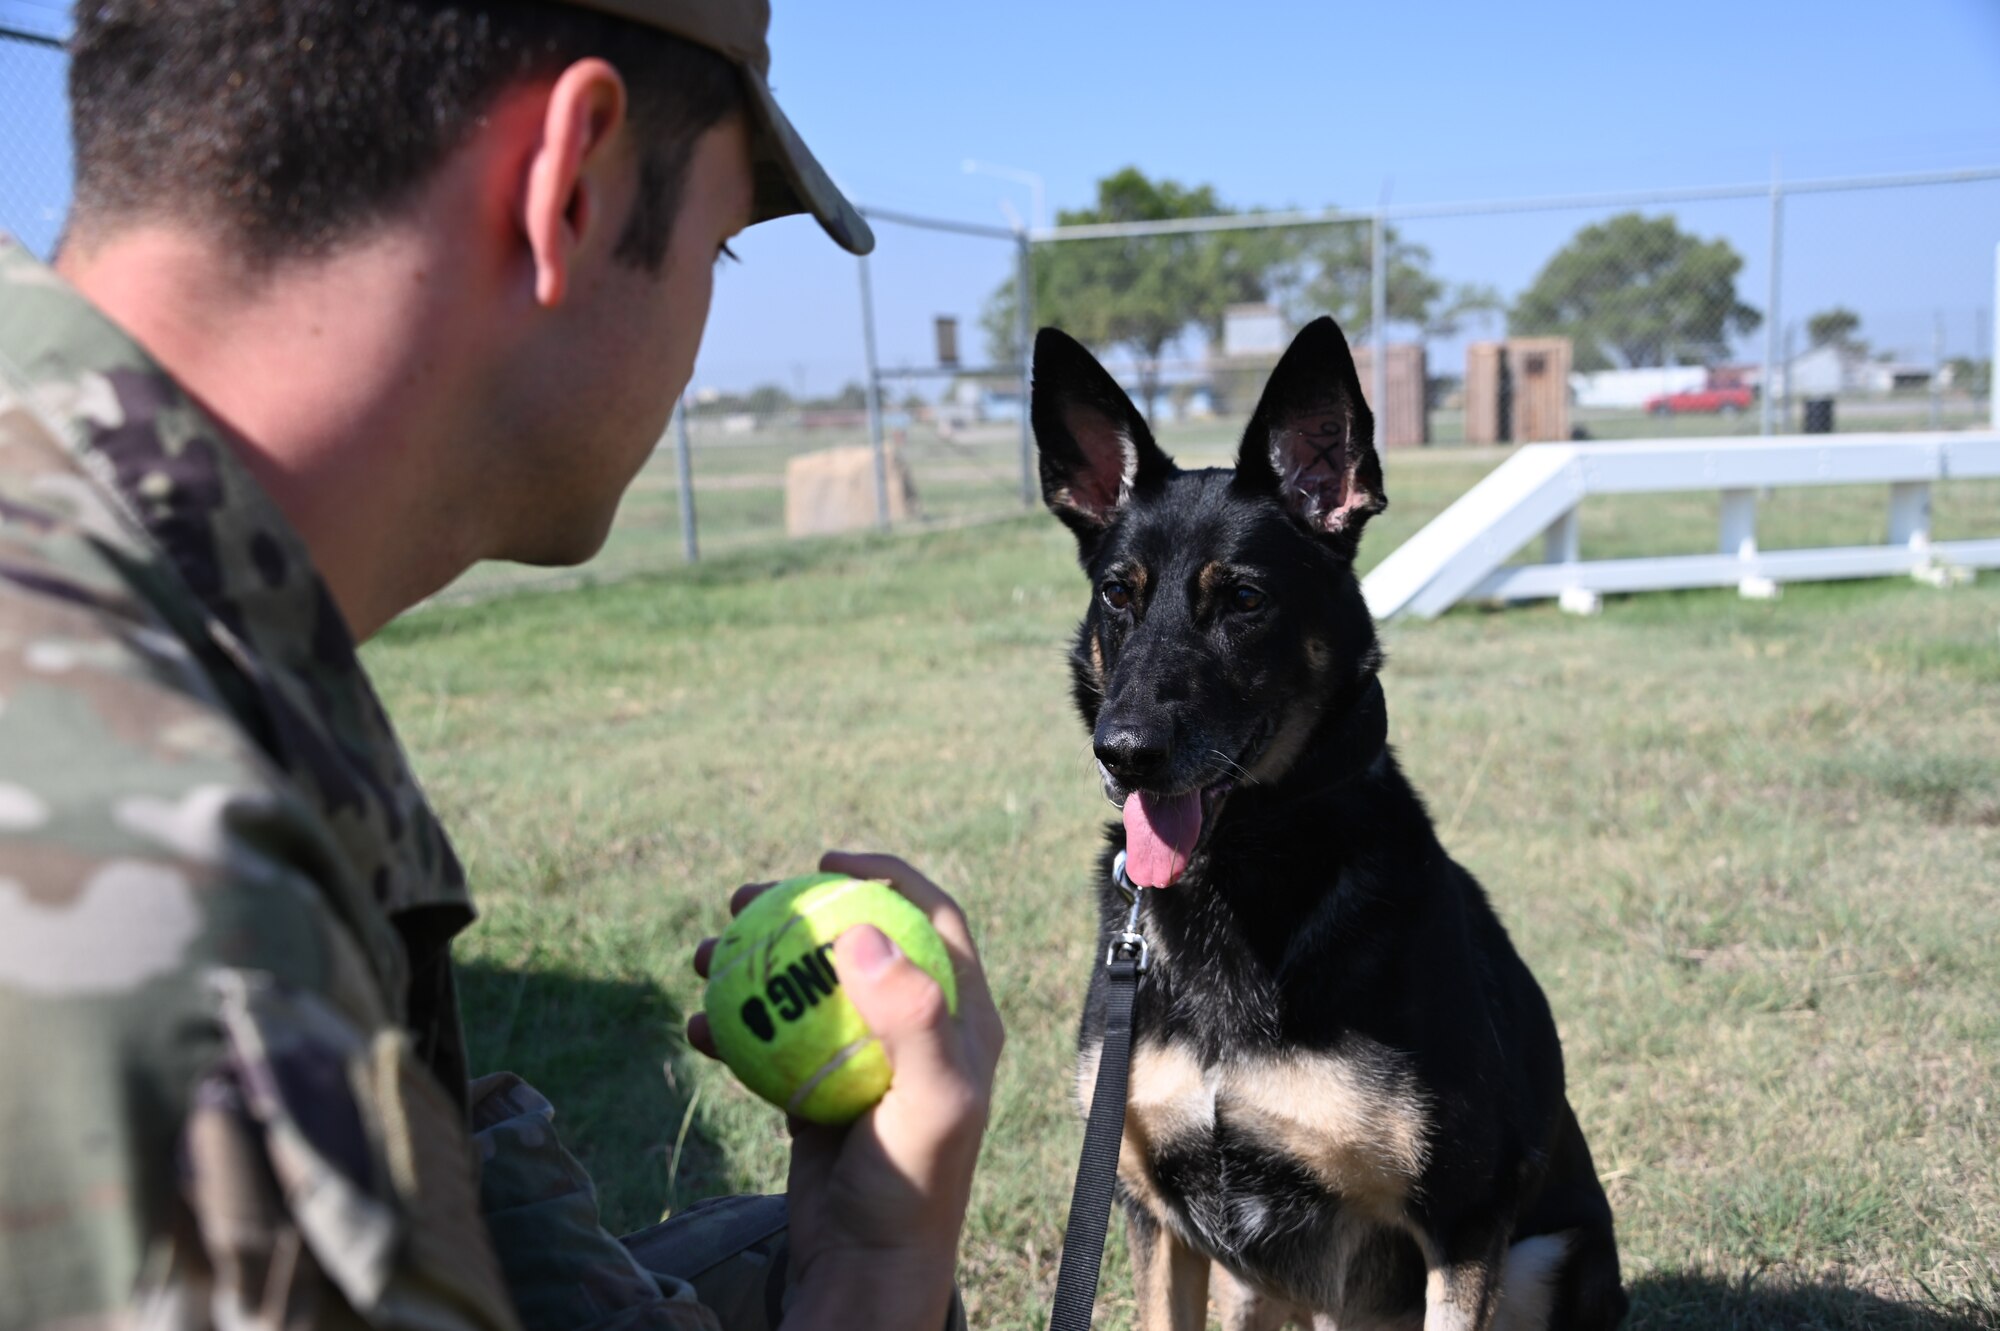 U.S. Air Force Senior Airman Trevor Frank, 97th Security Forces Squadron military working dog (MWD) handler, holds a toy in front of Cora, retired MWD, at Altus Air Force Base, Oklahoma, Sept. 9, 2022. Cora is rewarded for her training with dog toys. (U.S. Air Force photo by Senior Airman Kayla Christenson)